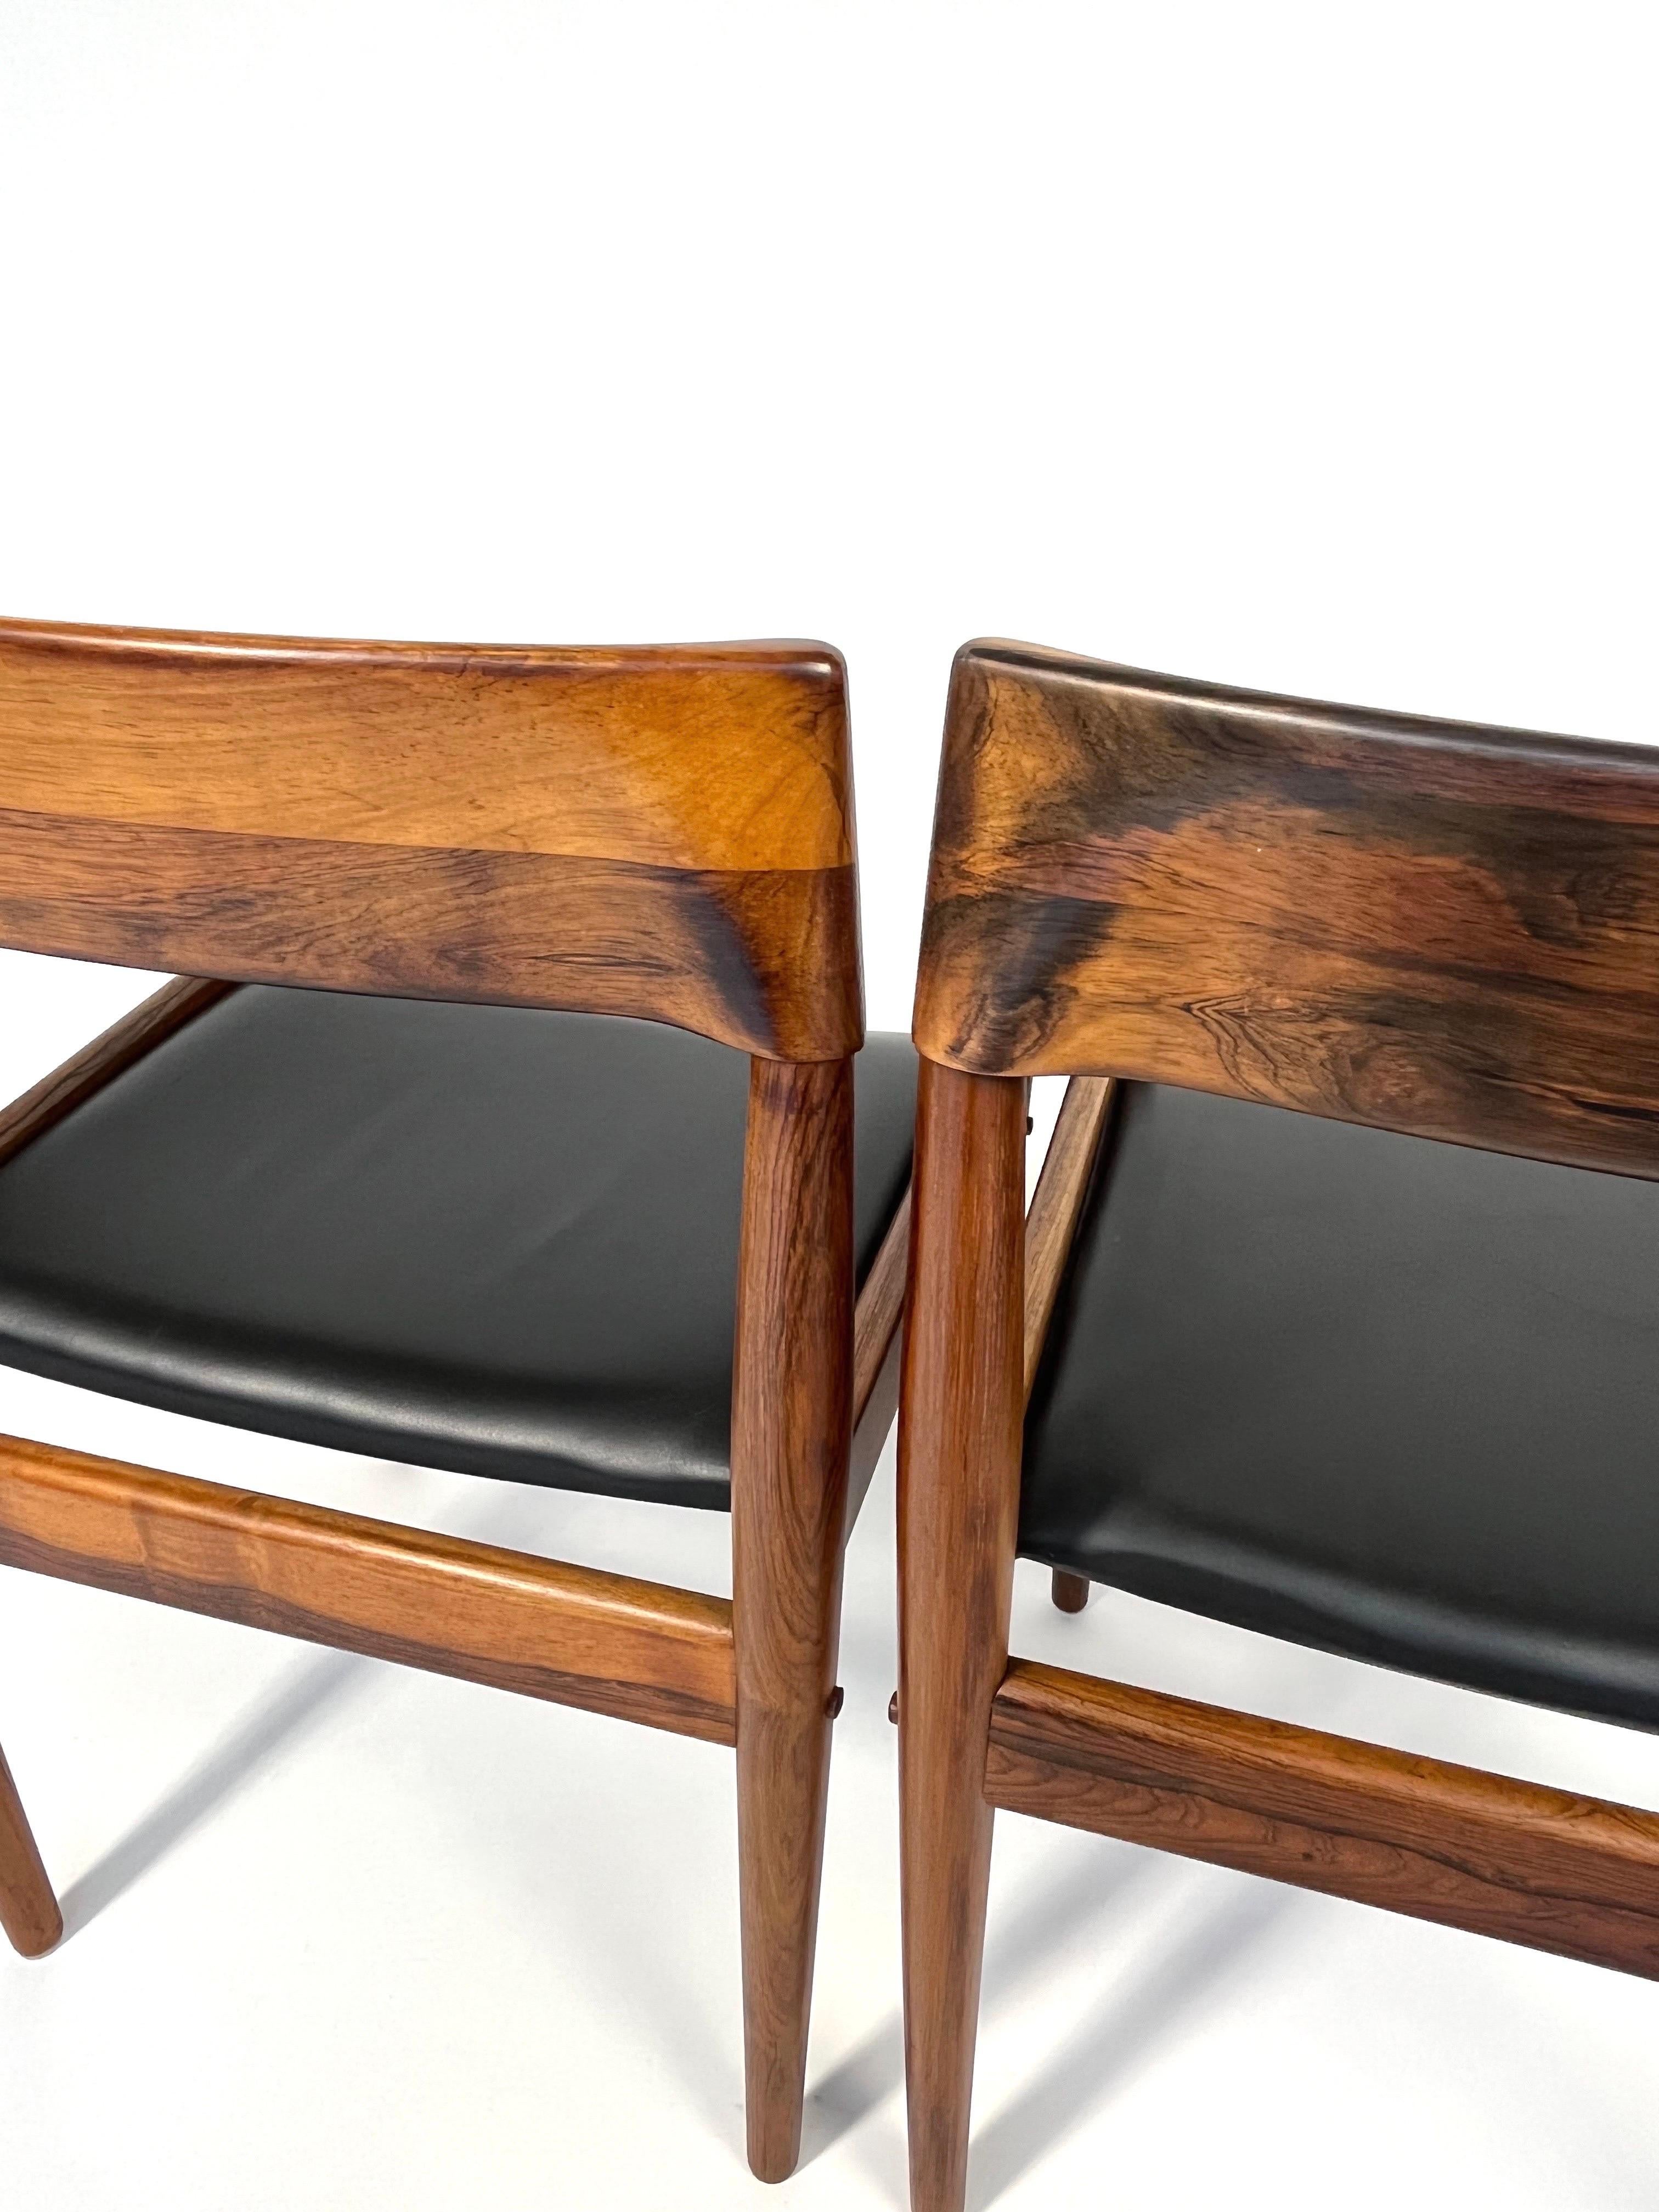 Pair of Grete Jalk Dining Chairs Rosewood P Jeppesen Denmark 1960s For Sale 5